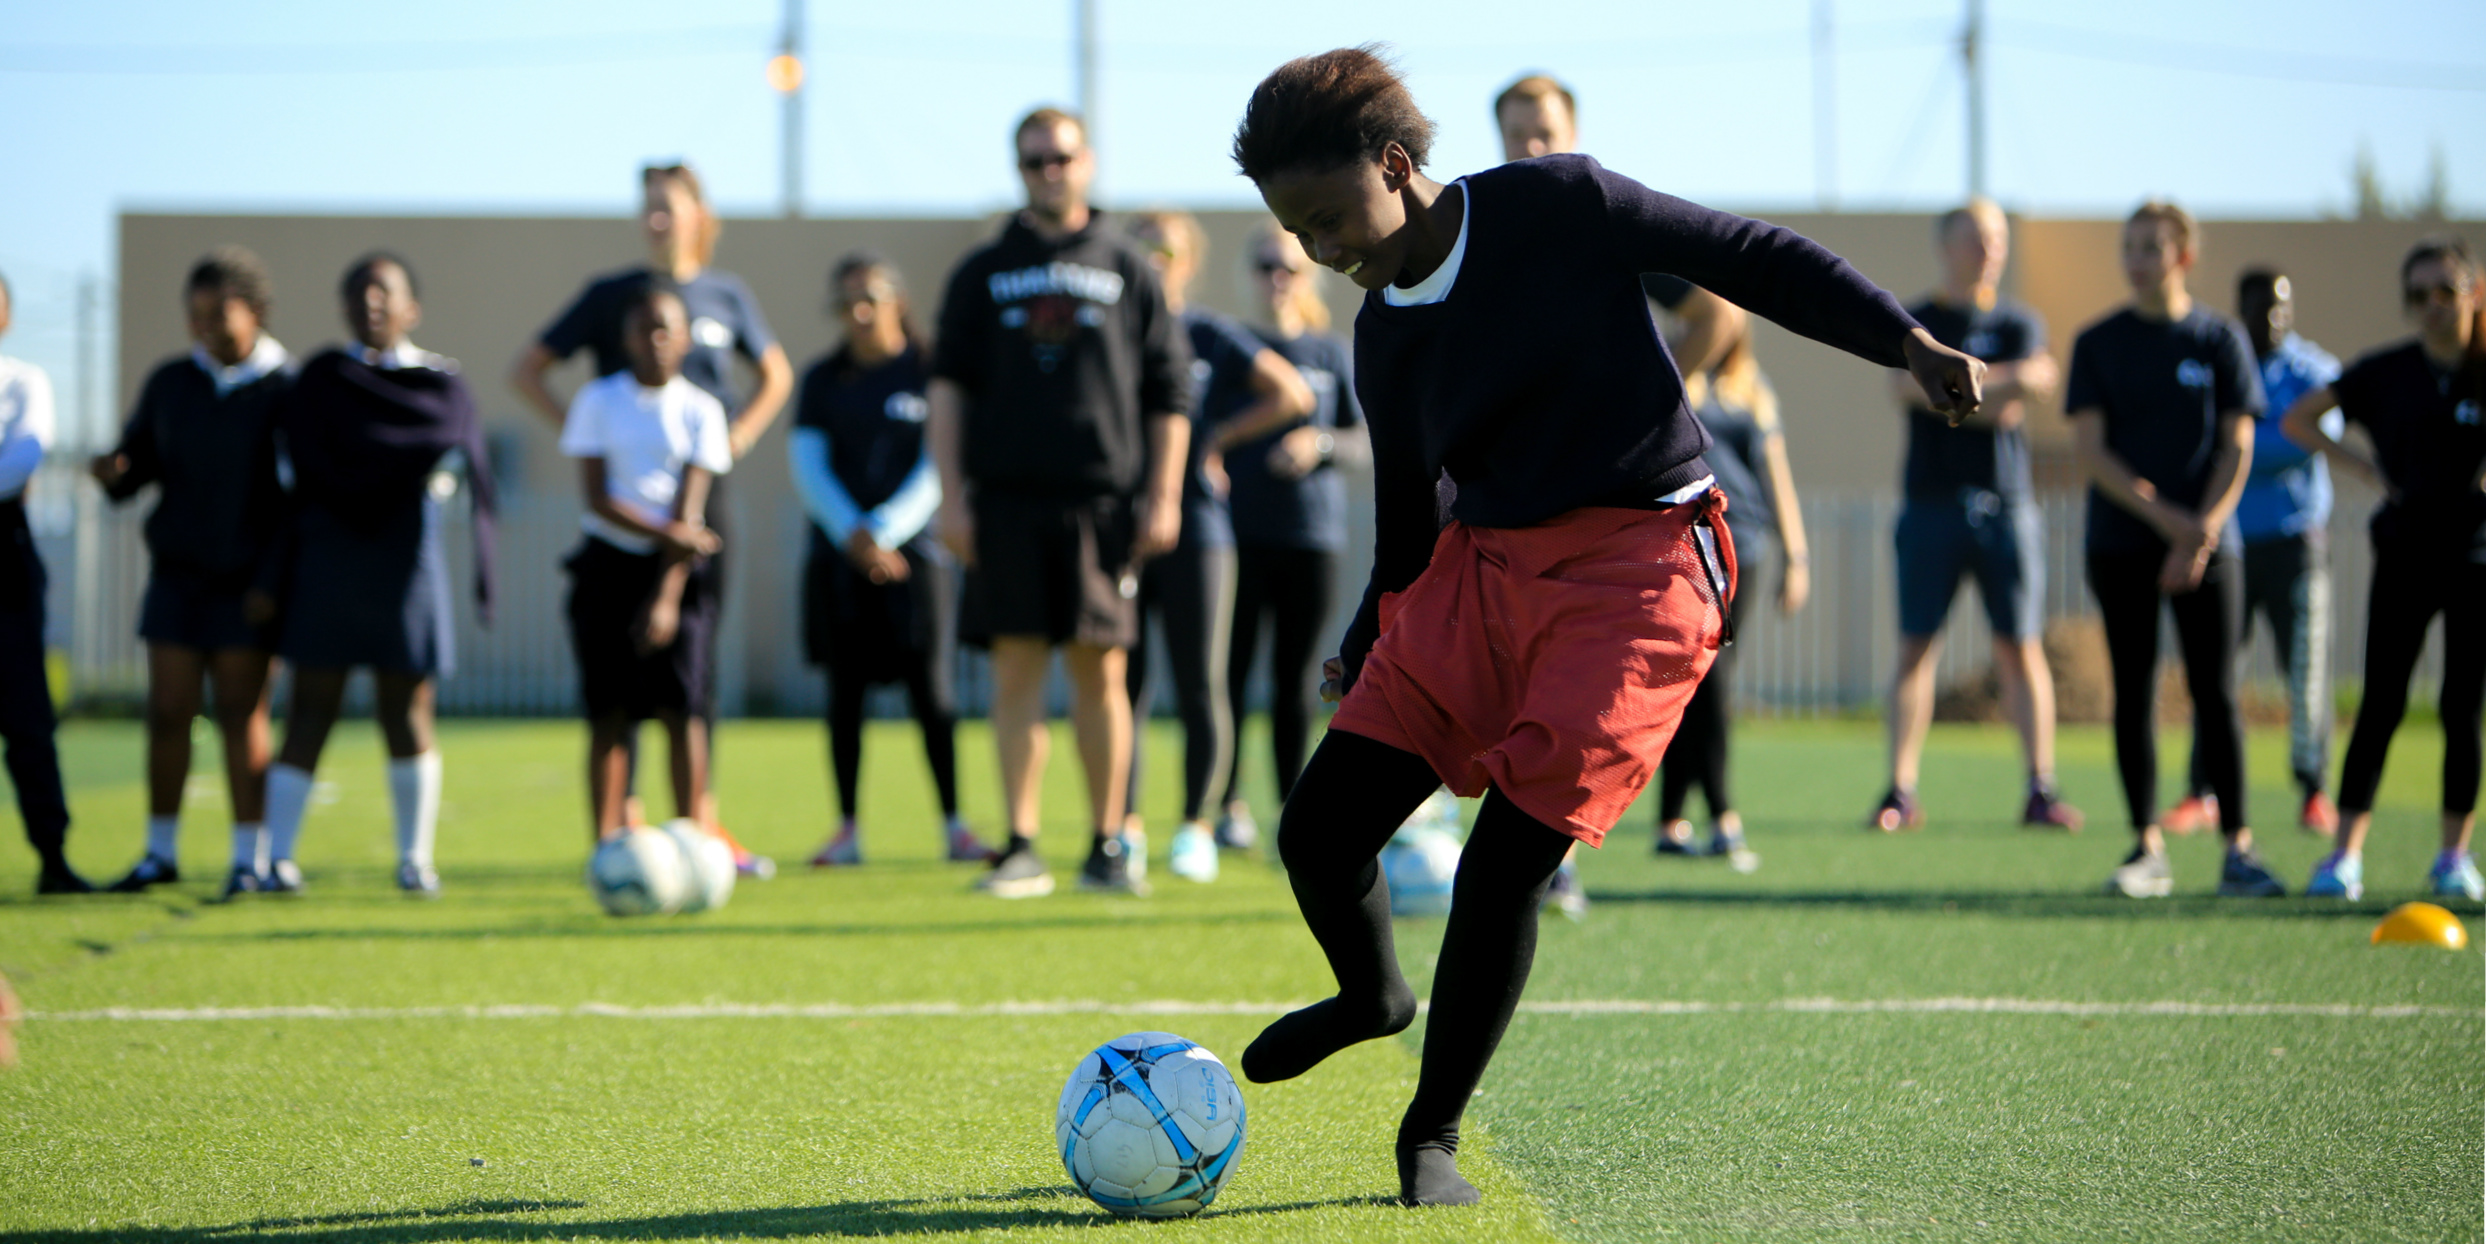 A girl goes in to kick a soccer ball triumphantly. As part of activities for women's empowerment, GVI participants facilitate sports lessons with Cape Town youth.